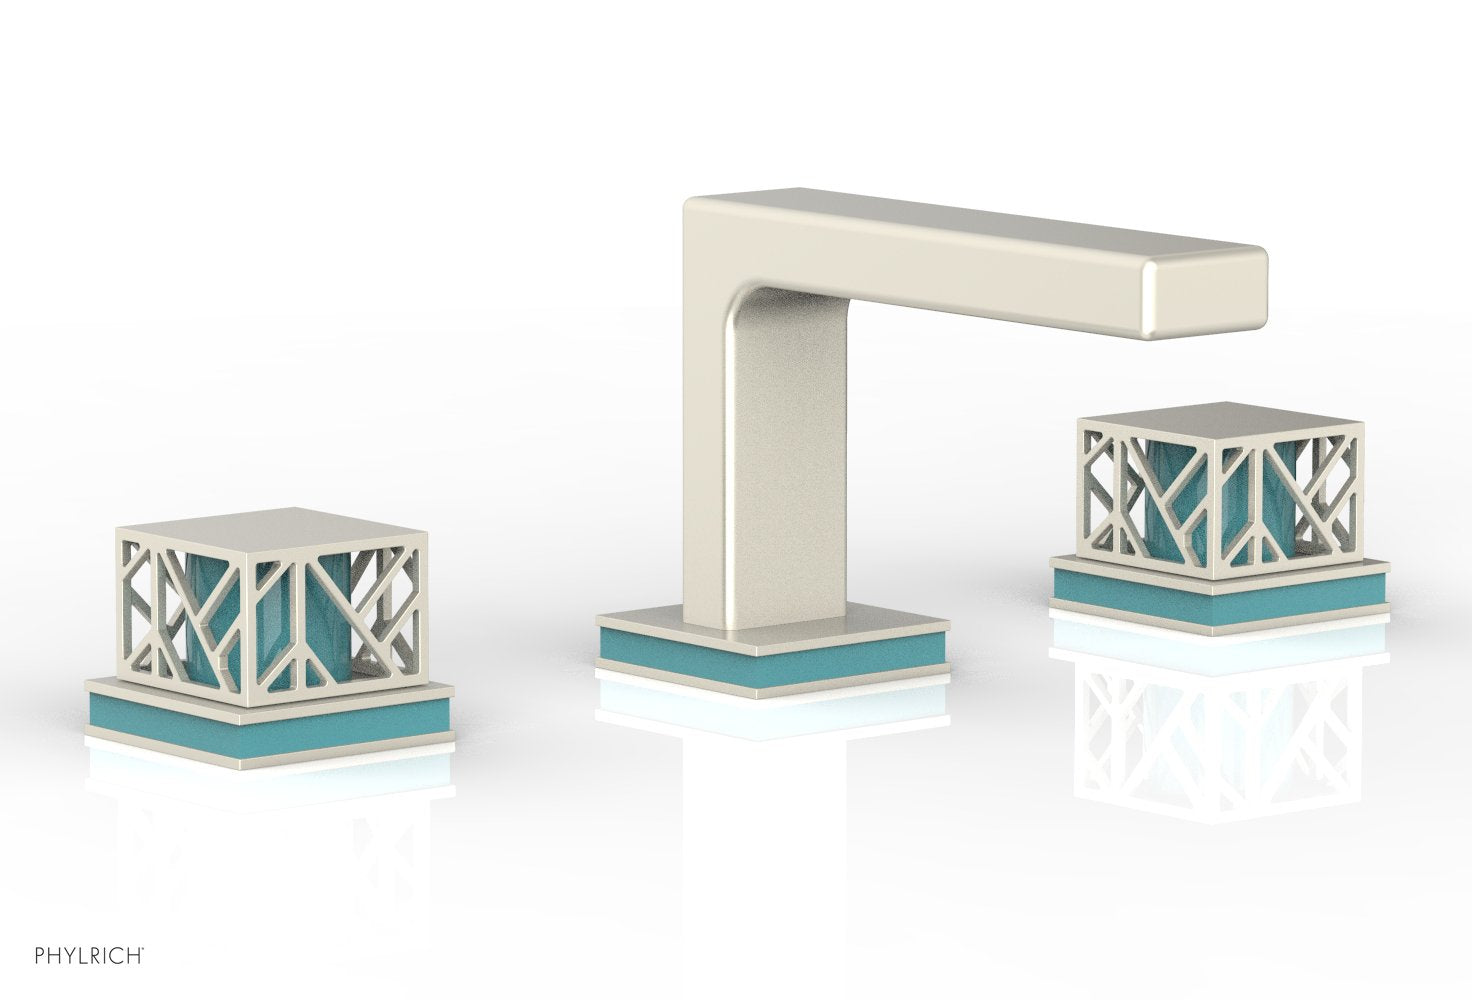 Phylrich JOLIE Widespread Faucet - Square Handles with "Turquoise" Accents